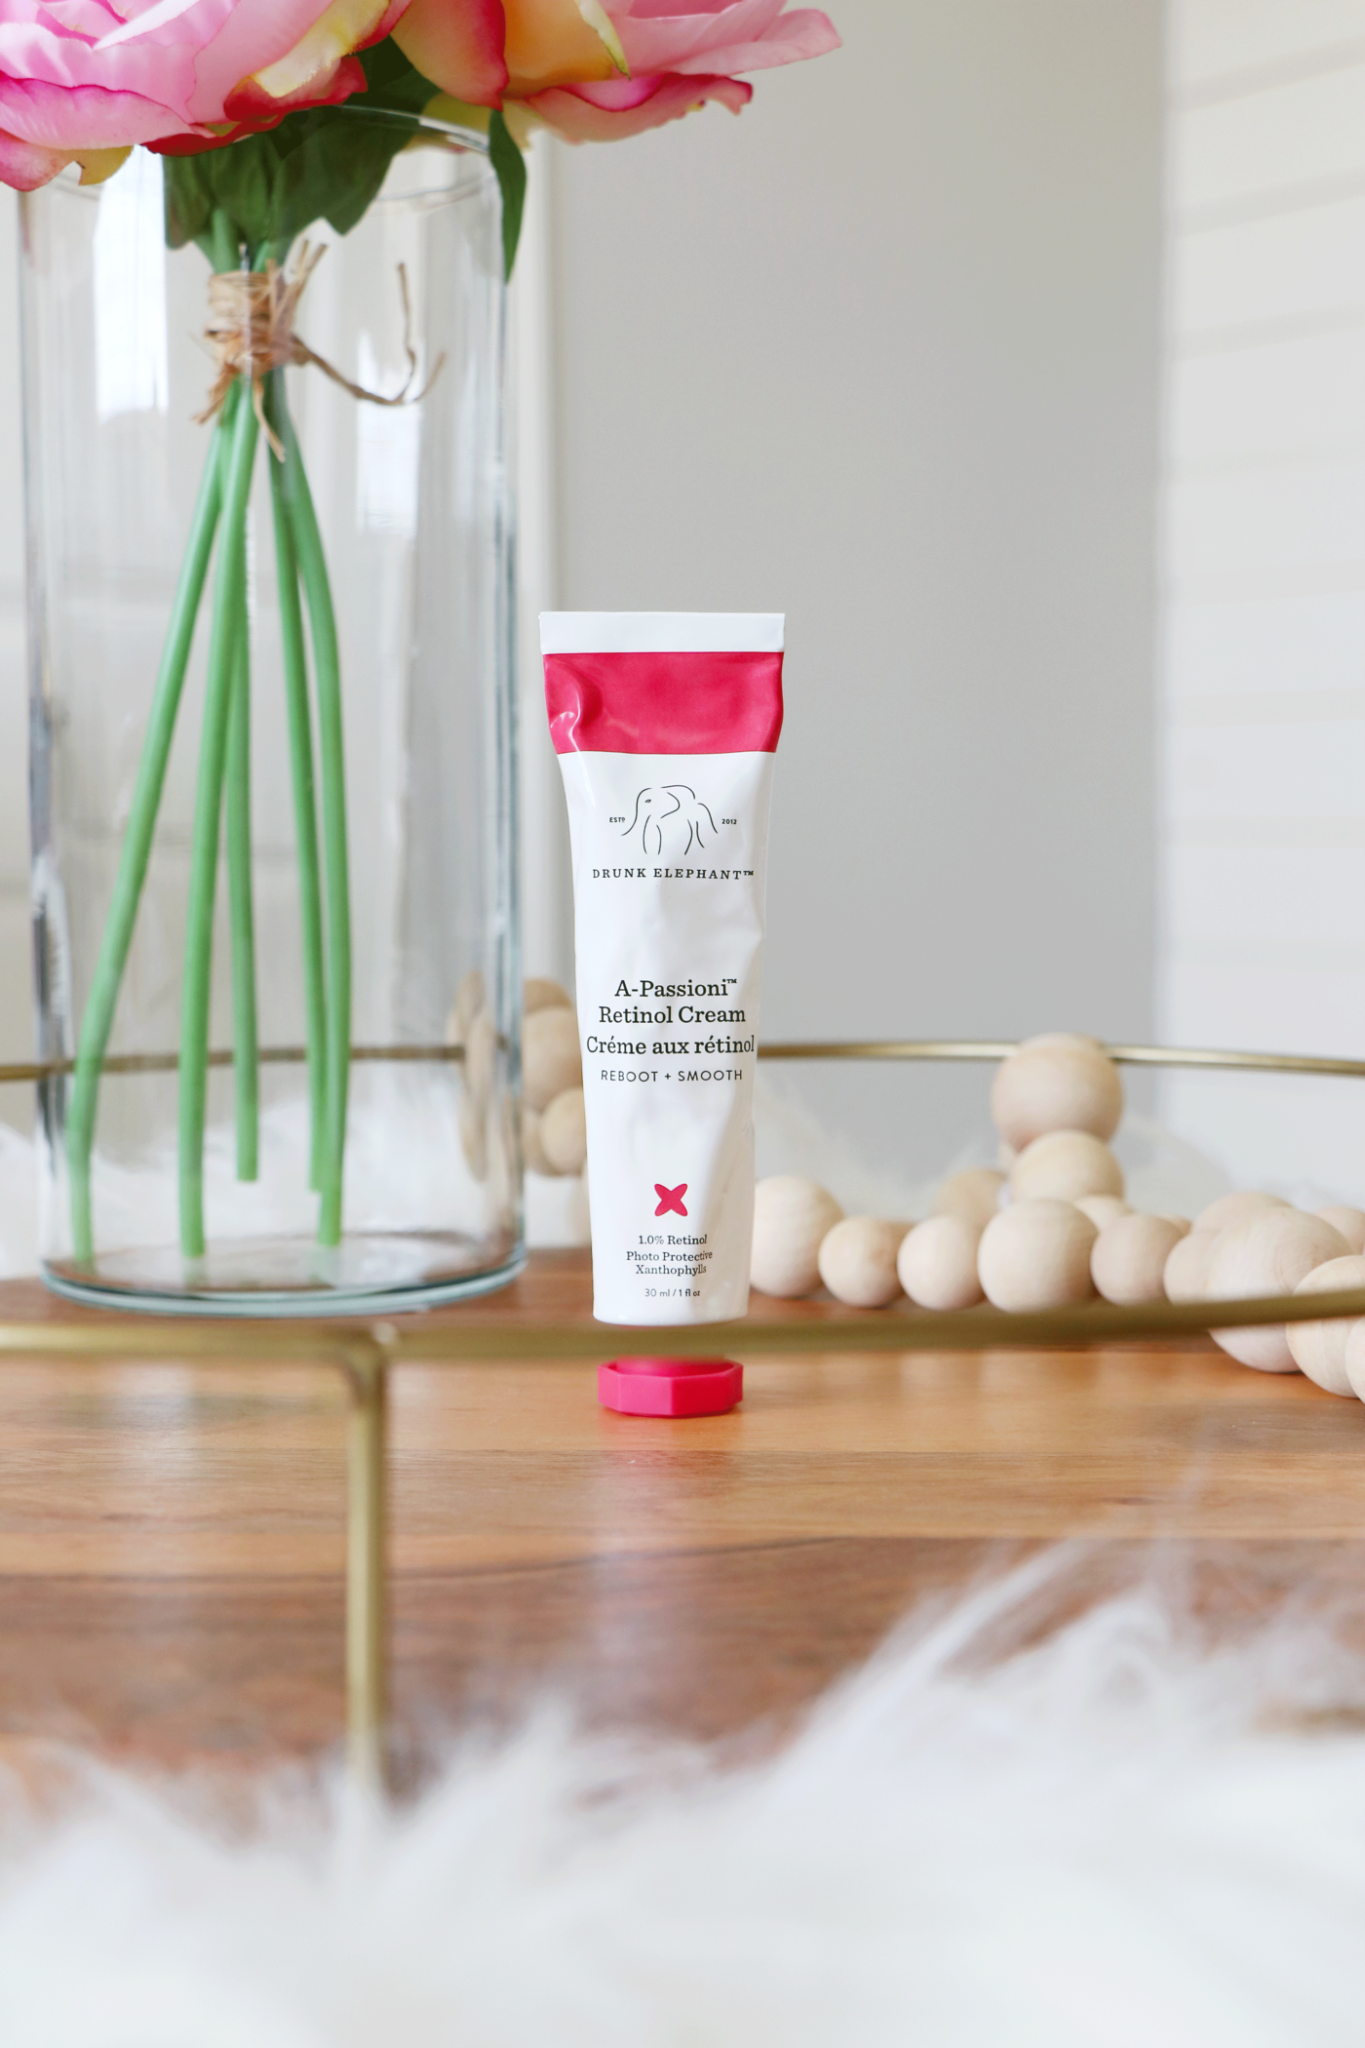 So you want to use a retinol but aren't sure where to start? Makeup Life and Love is sharing the rundown on why and how to use a retinol effectively. Click to see the how's and why's of retinol HERE!